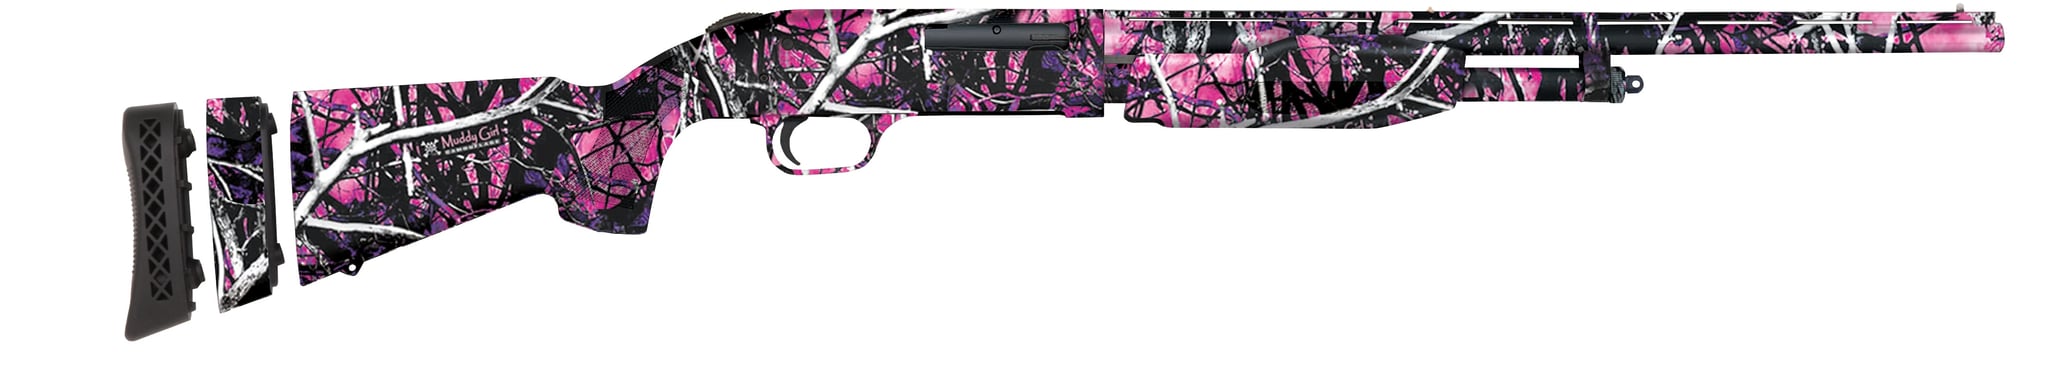 Mossberg adds a new chambering in the 510 Mini Muddy Girl series with 410 bore joining 20 gauge. (Photo: Mossberg)